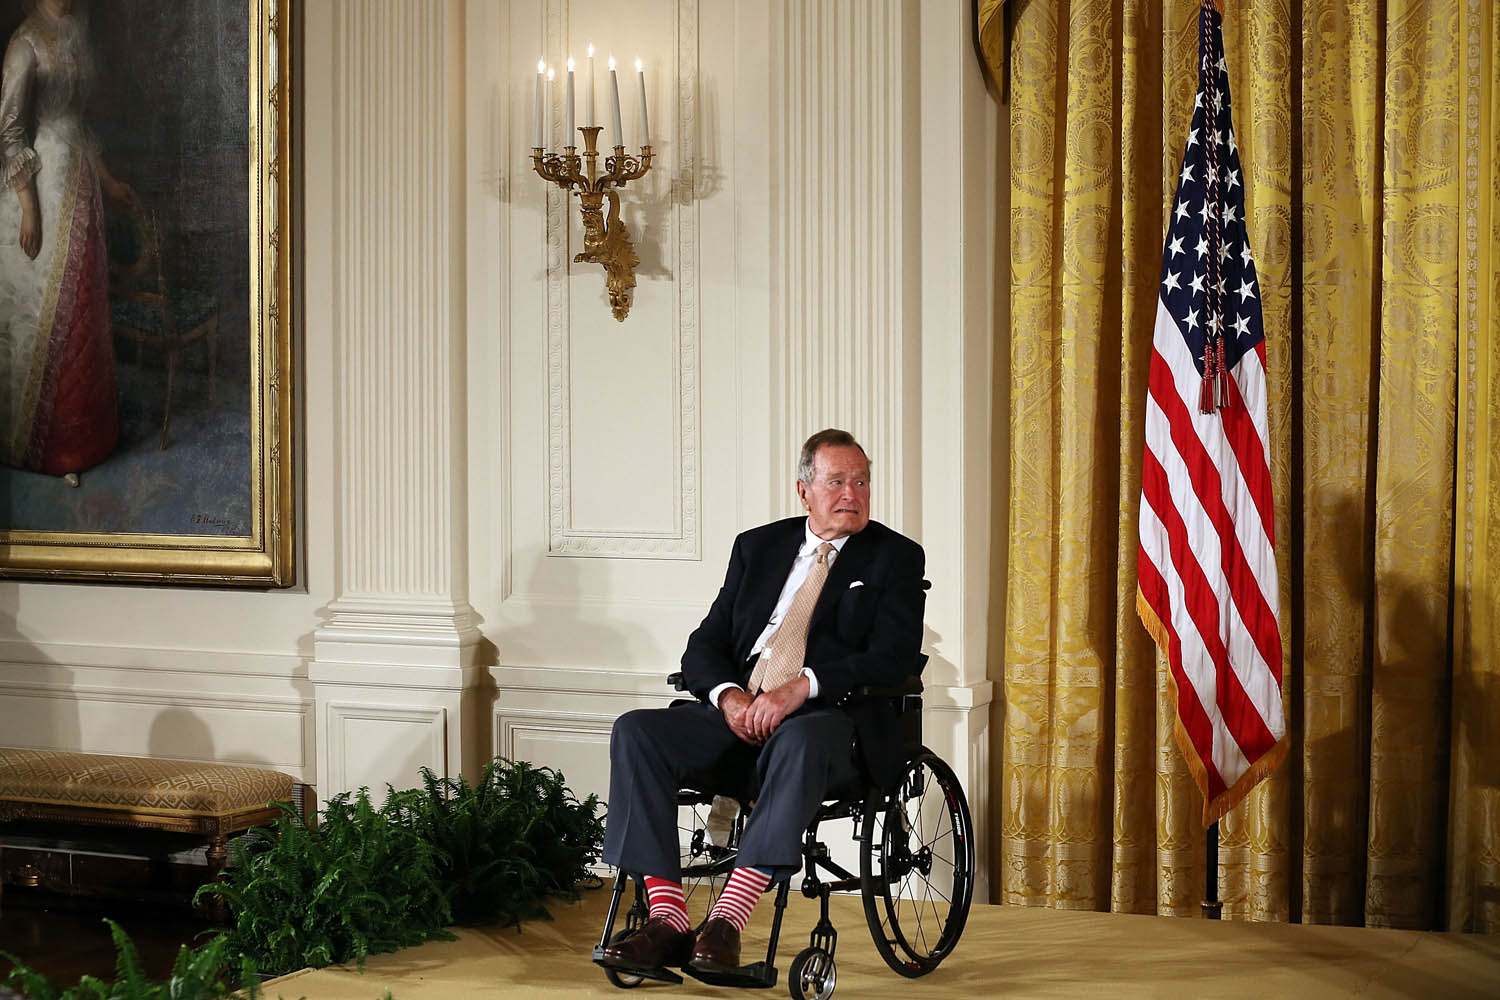 *** BESTPIX *** Obama Hosts George H.W. Bush And Family To Honor 5000th Points Of Light Winner